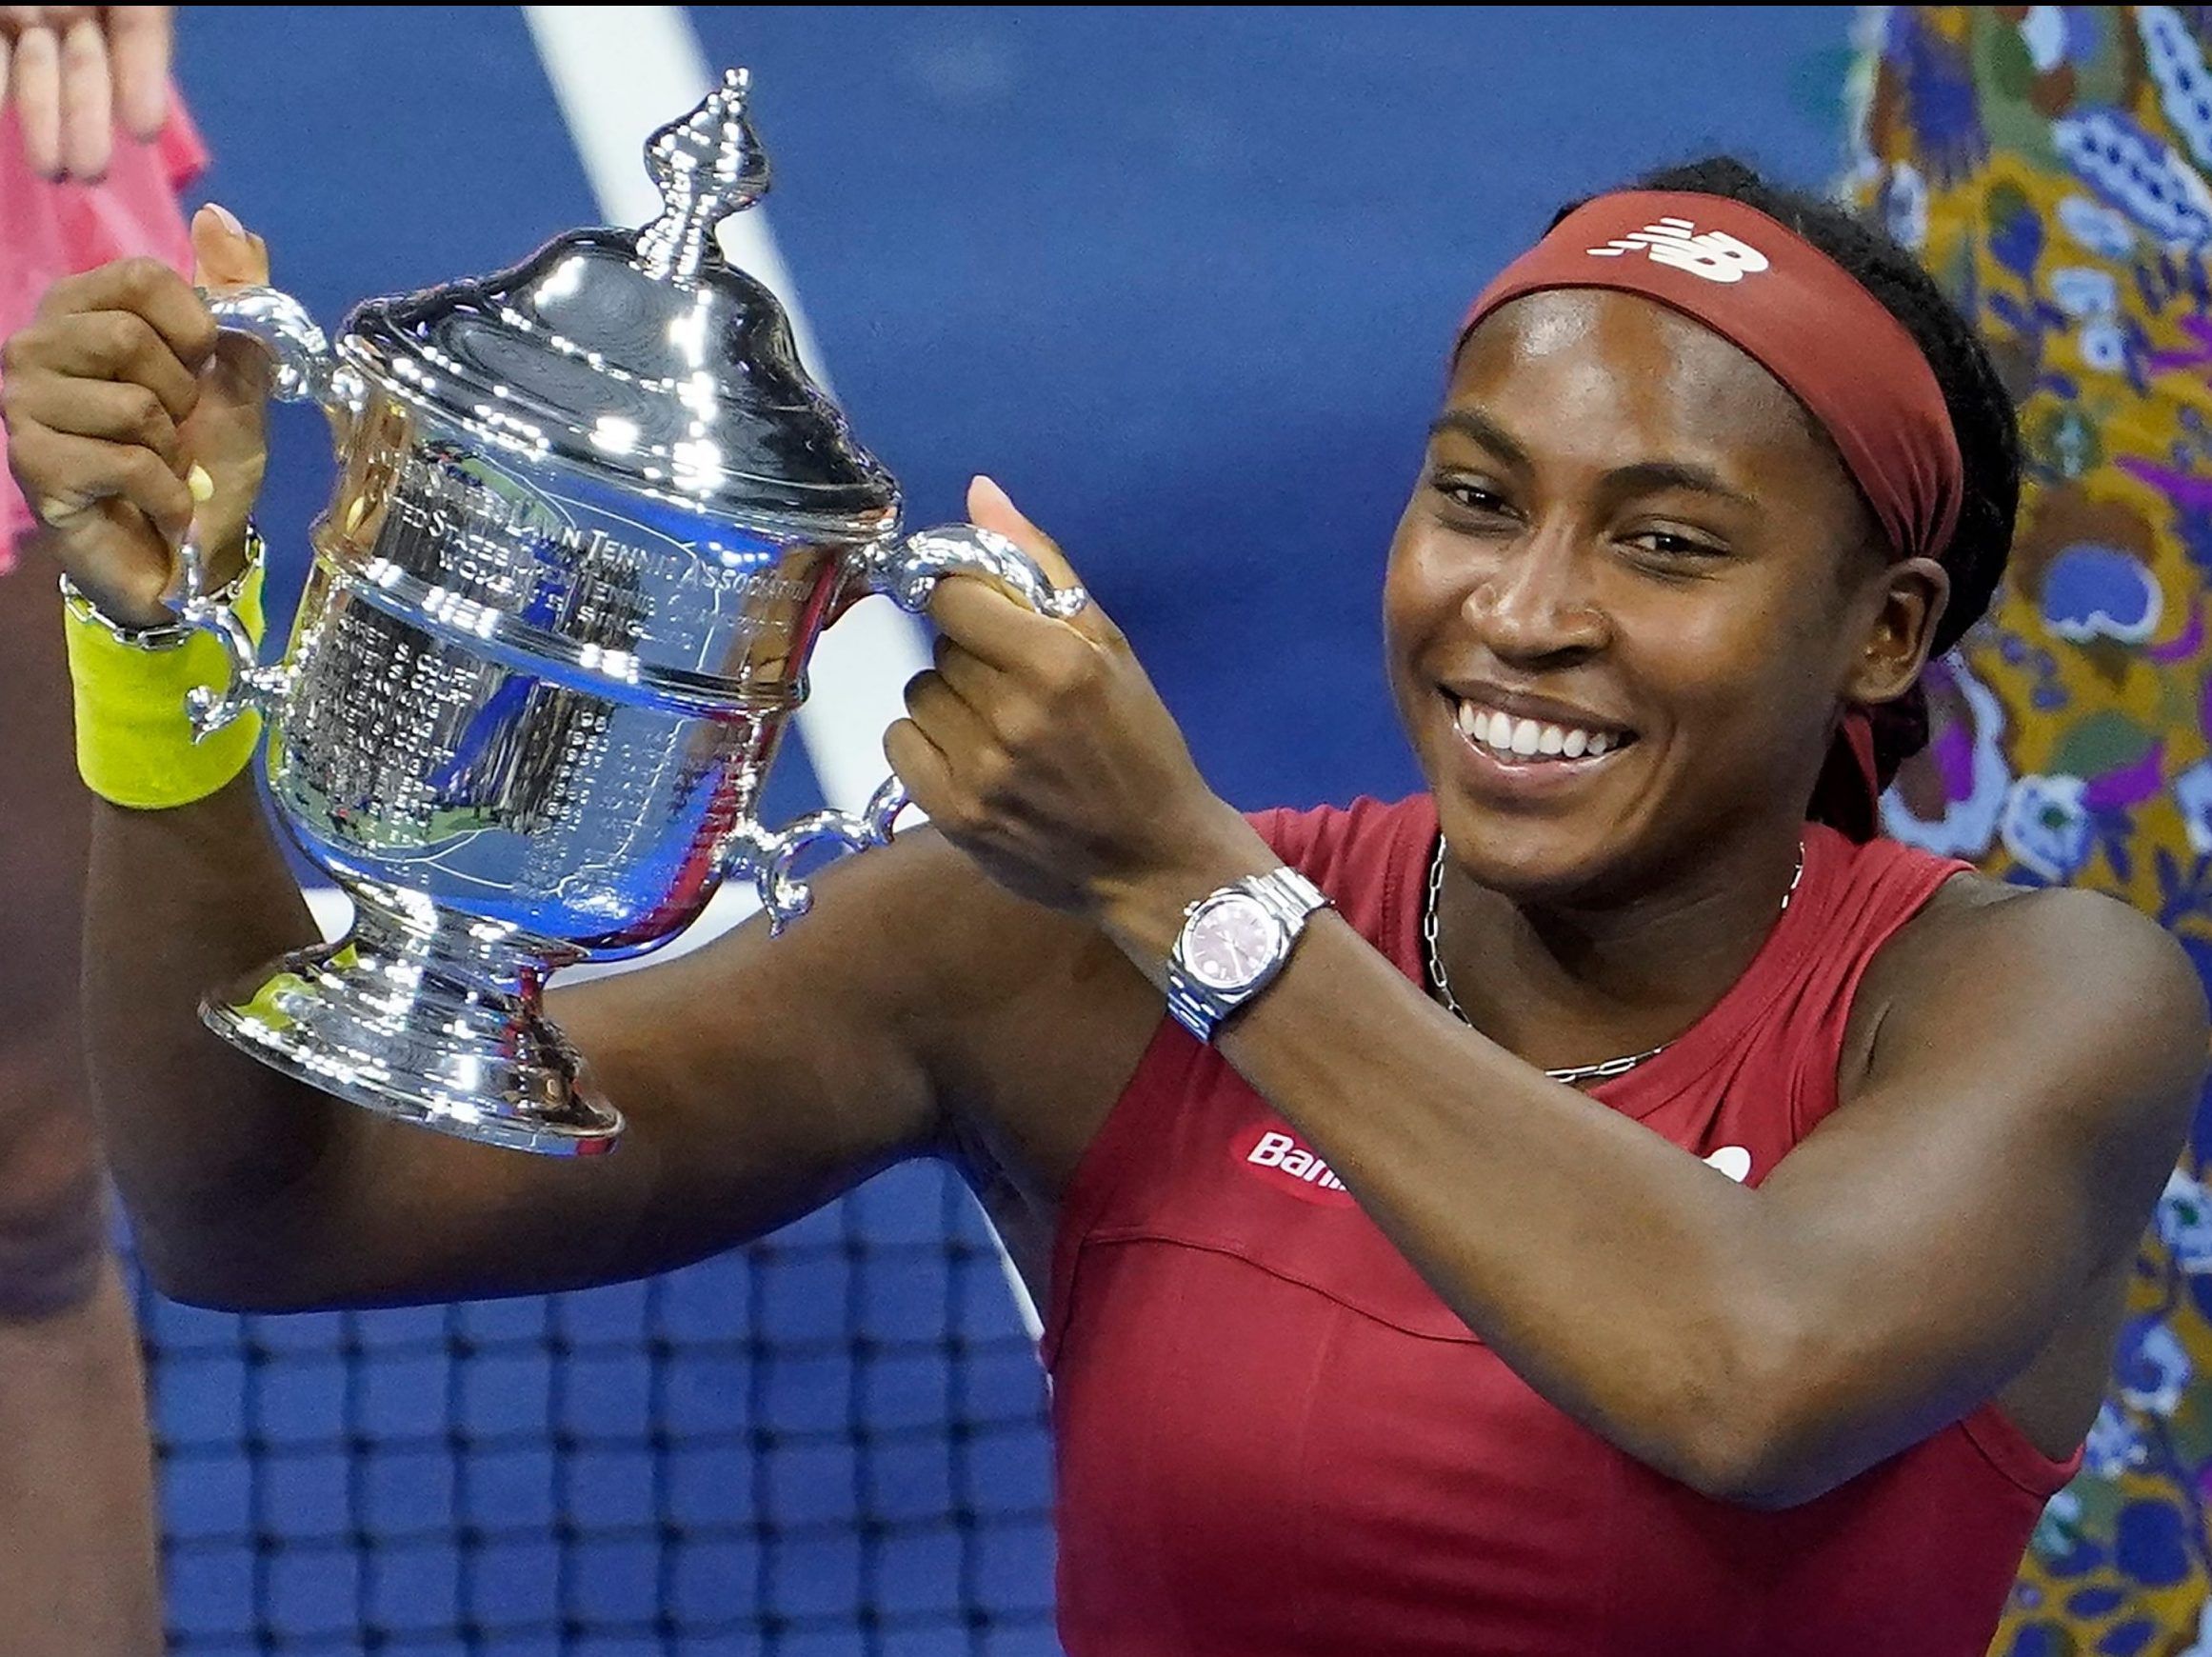 Coco Gauff wins the US Open for her first Grand Slam title at age 19, News